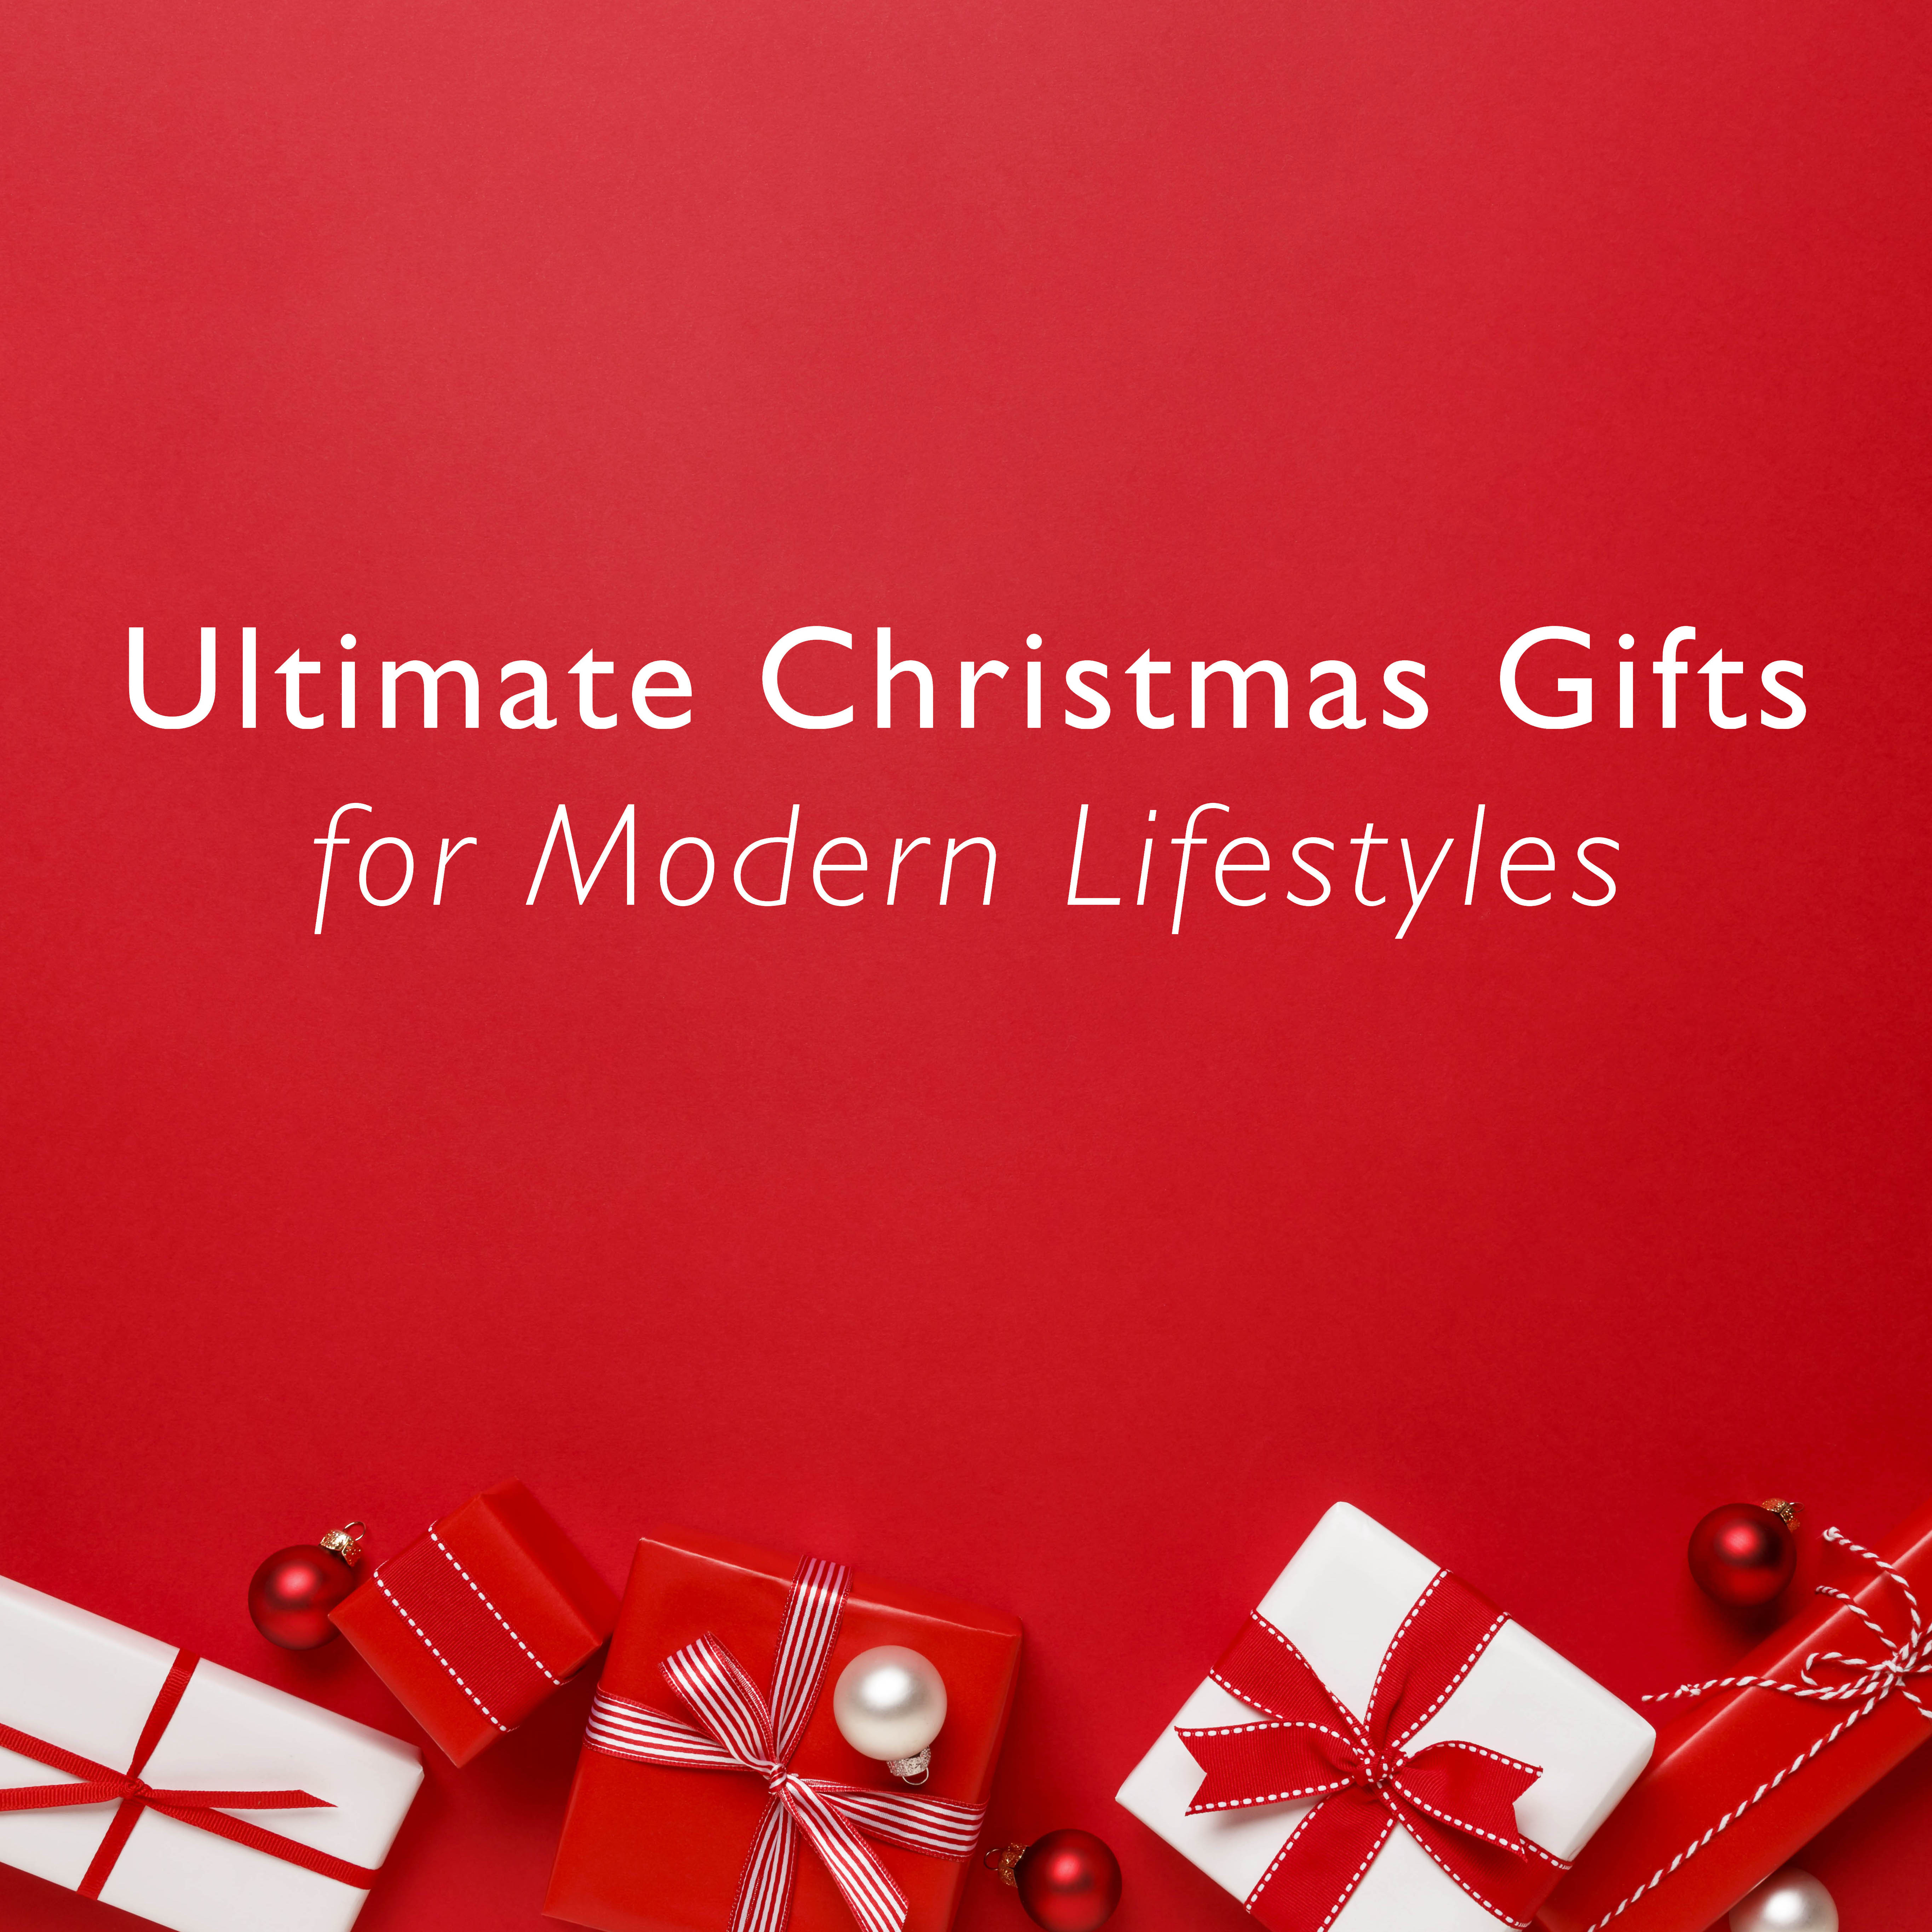 3 Ultimate Christmas Gifts for Modern Lifestyles